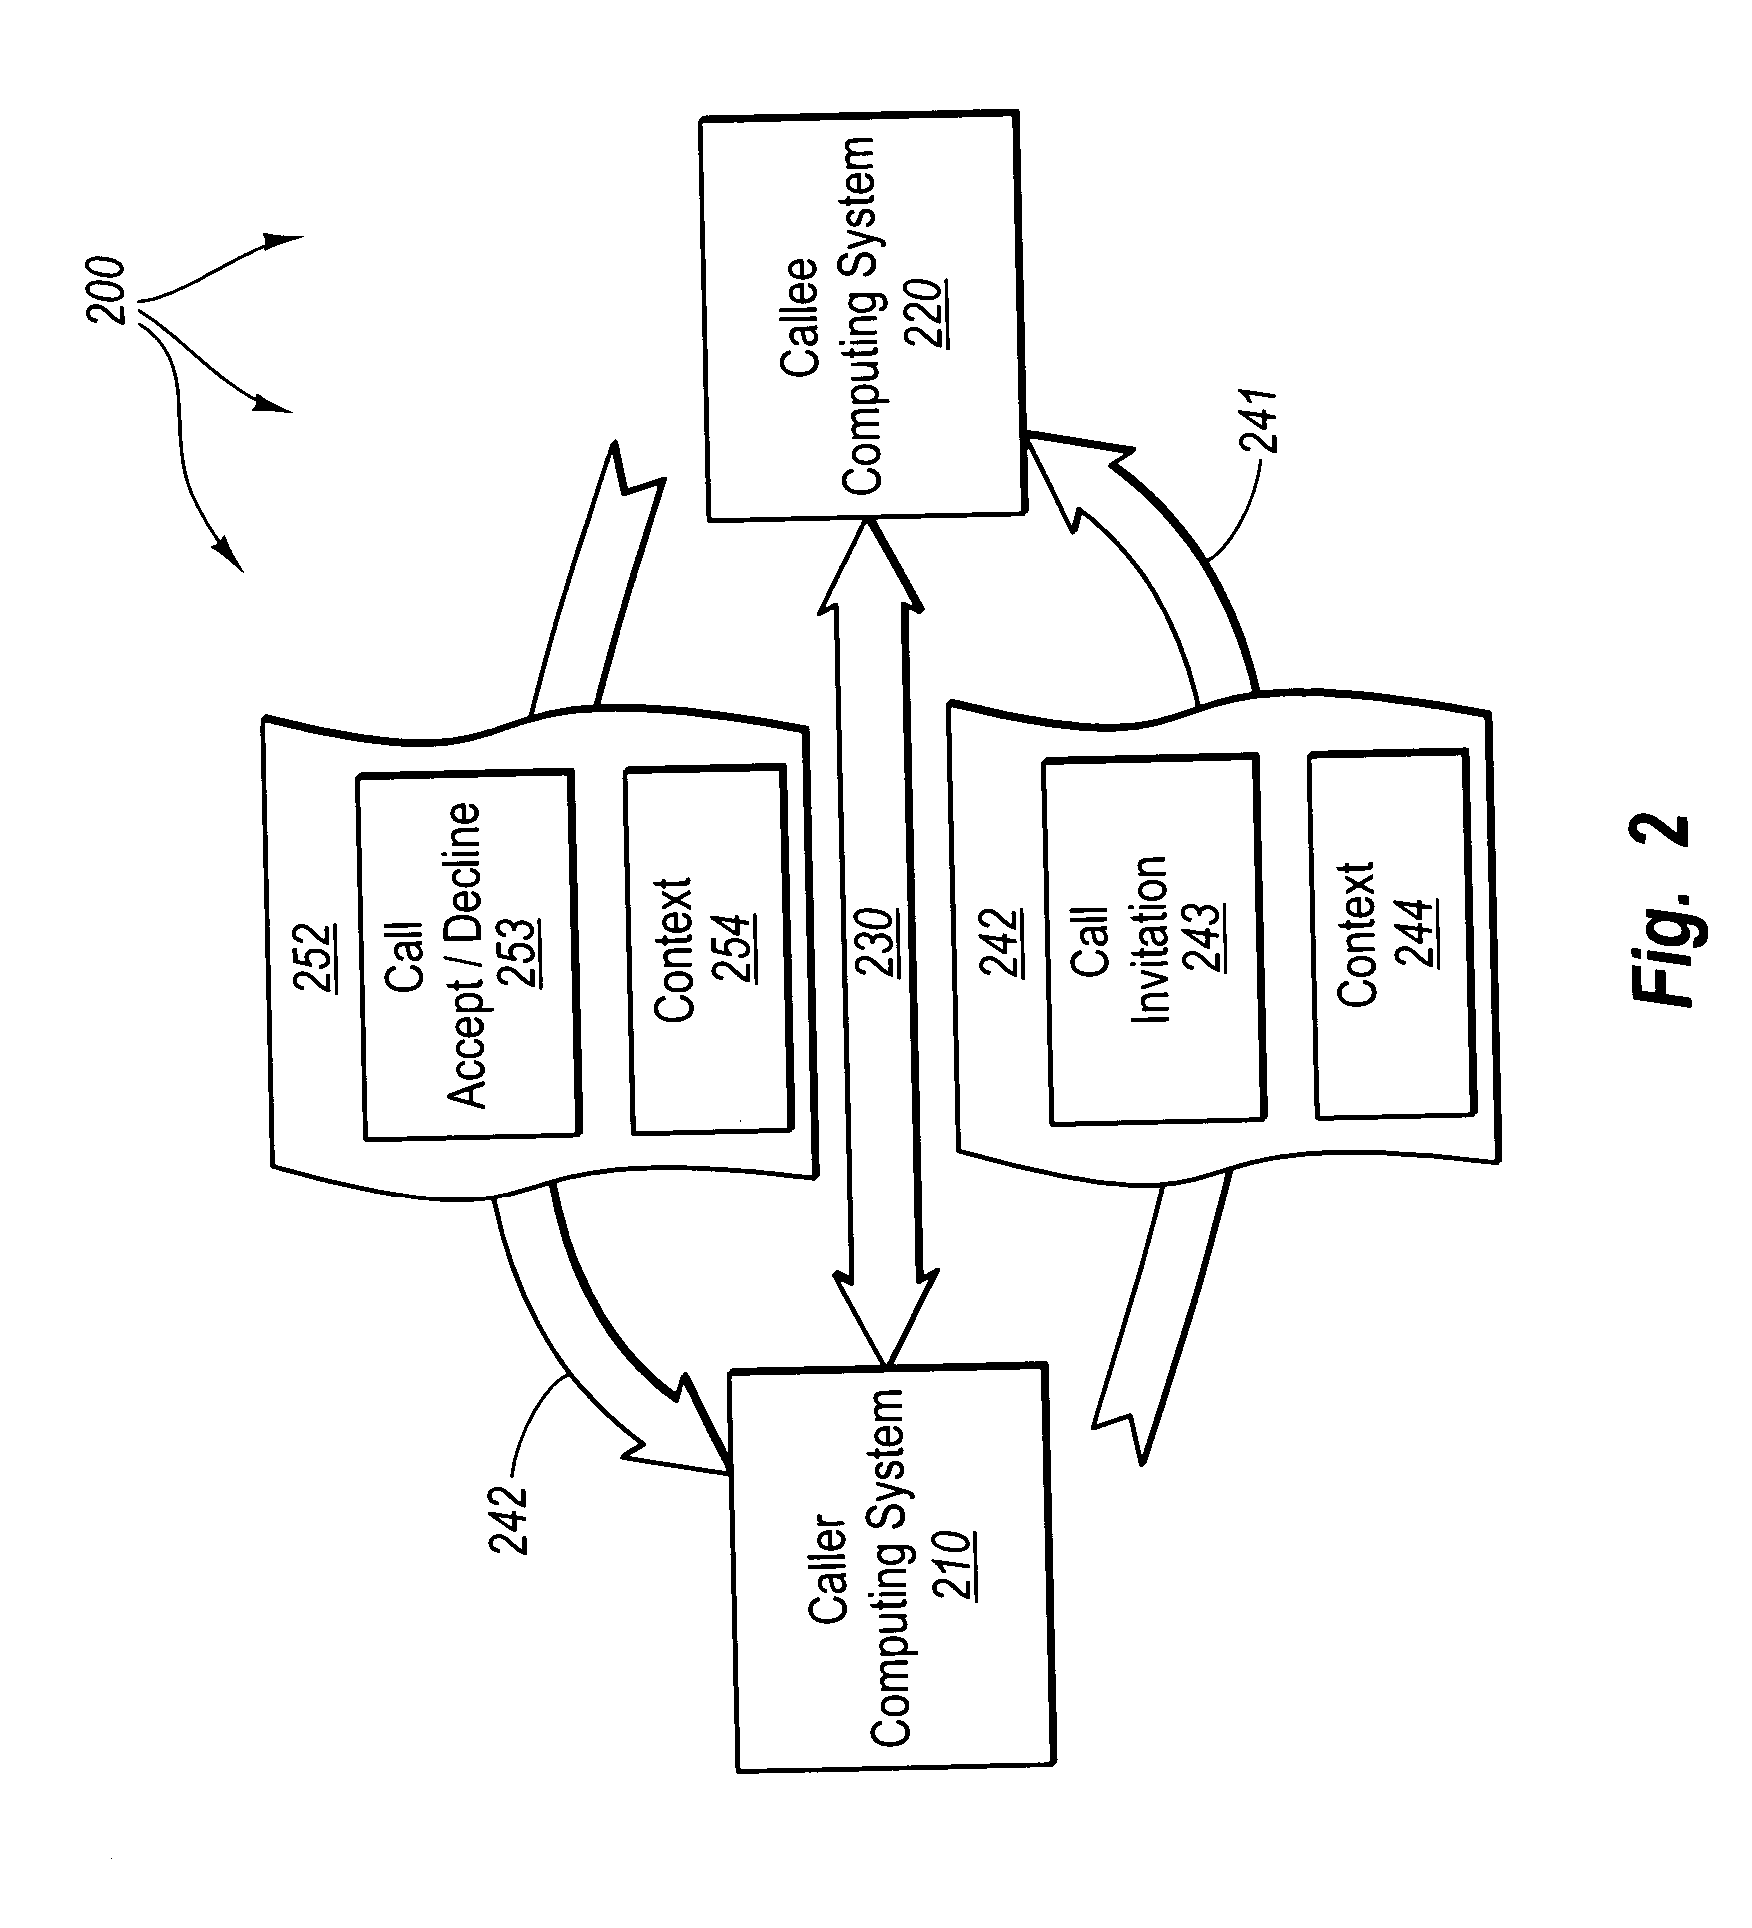 Integrated telephone call and context notification mechanism